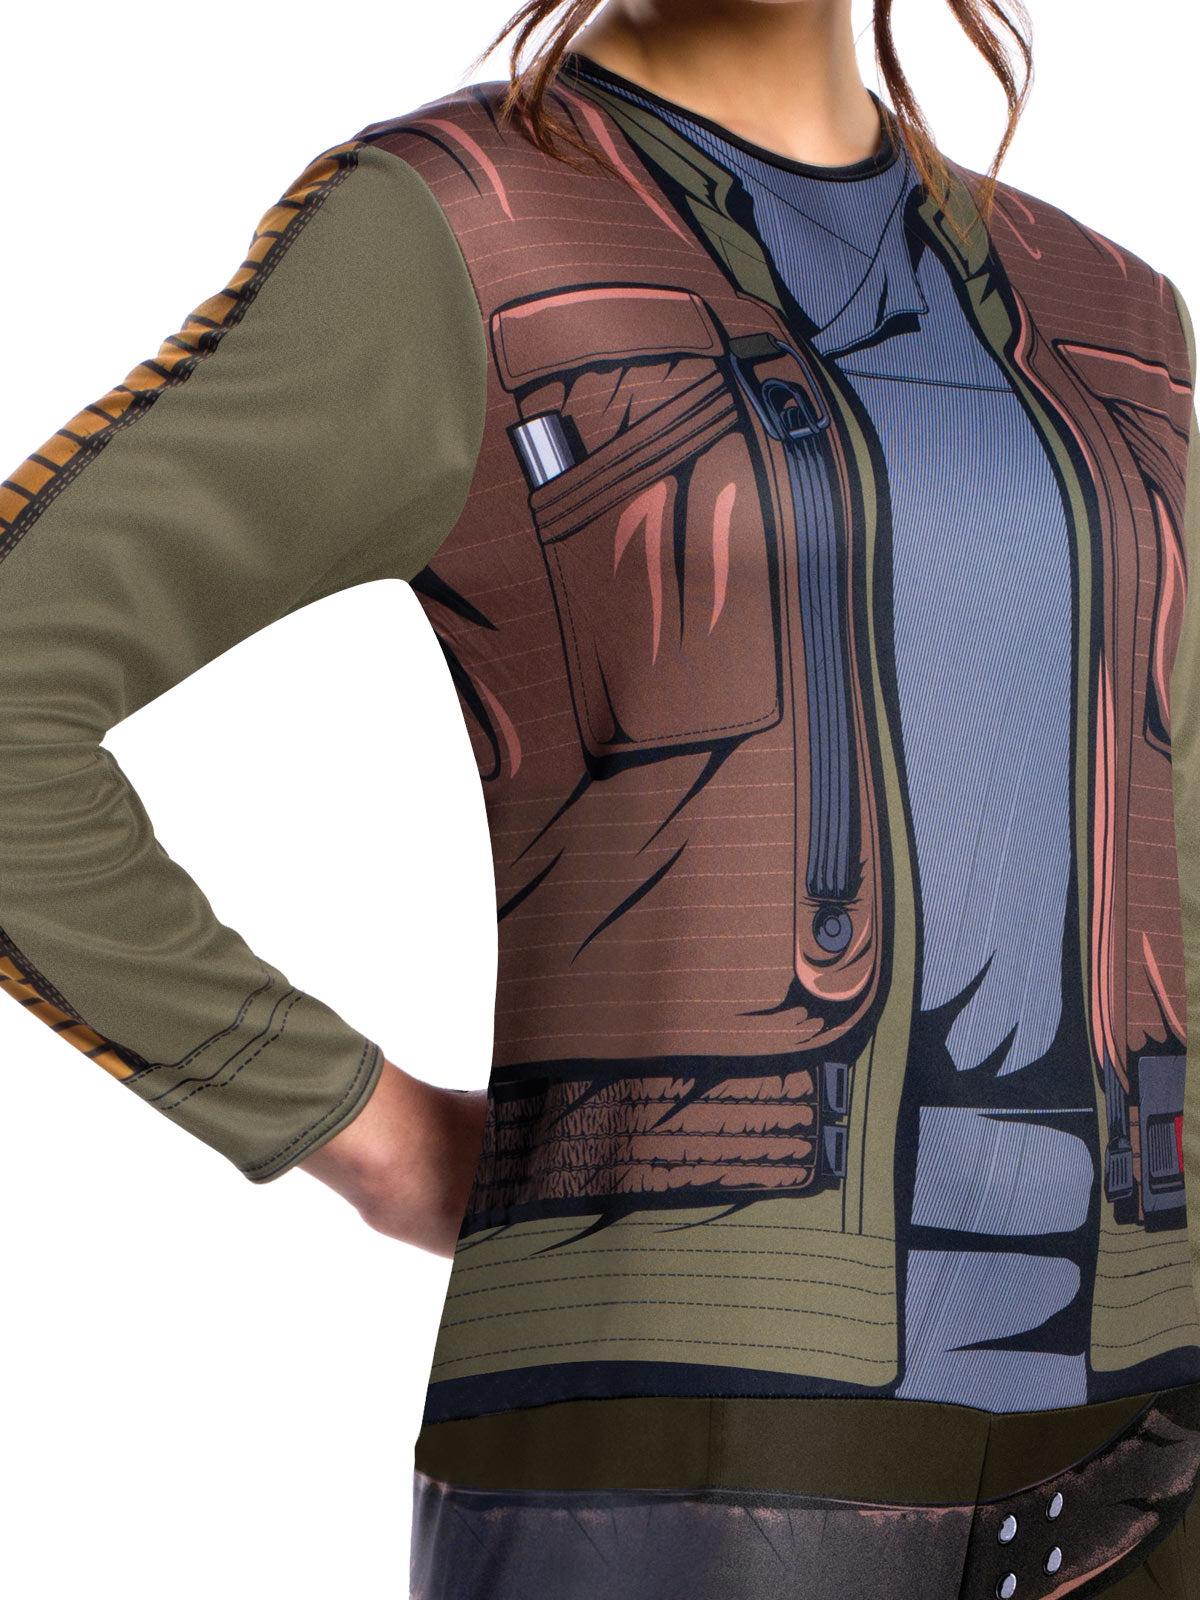 Rubies Jyn Erso Rogue One Classic Adult Costume (Size S)